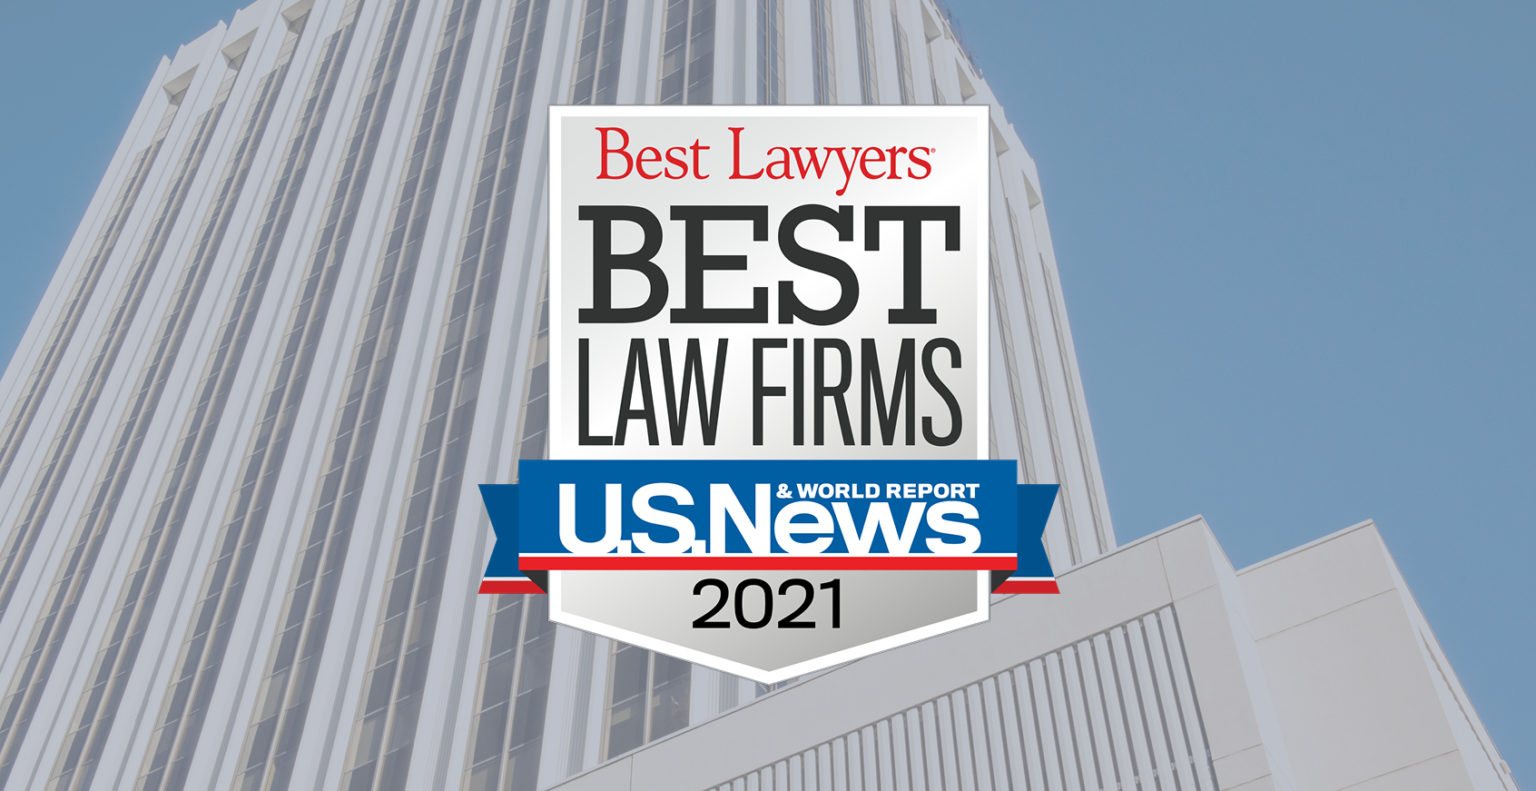 Larson • King Named to 2021 “Best Law Firms” By U.S. News Best